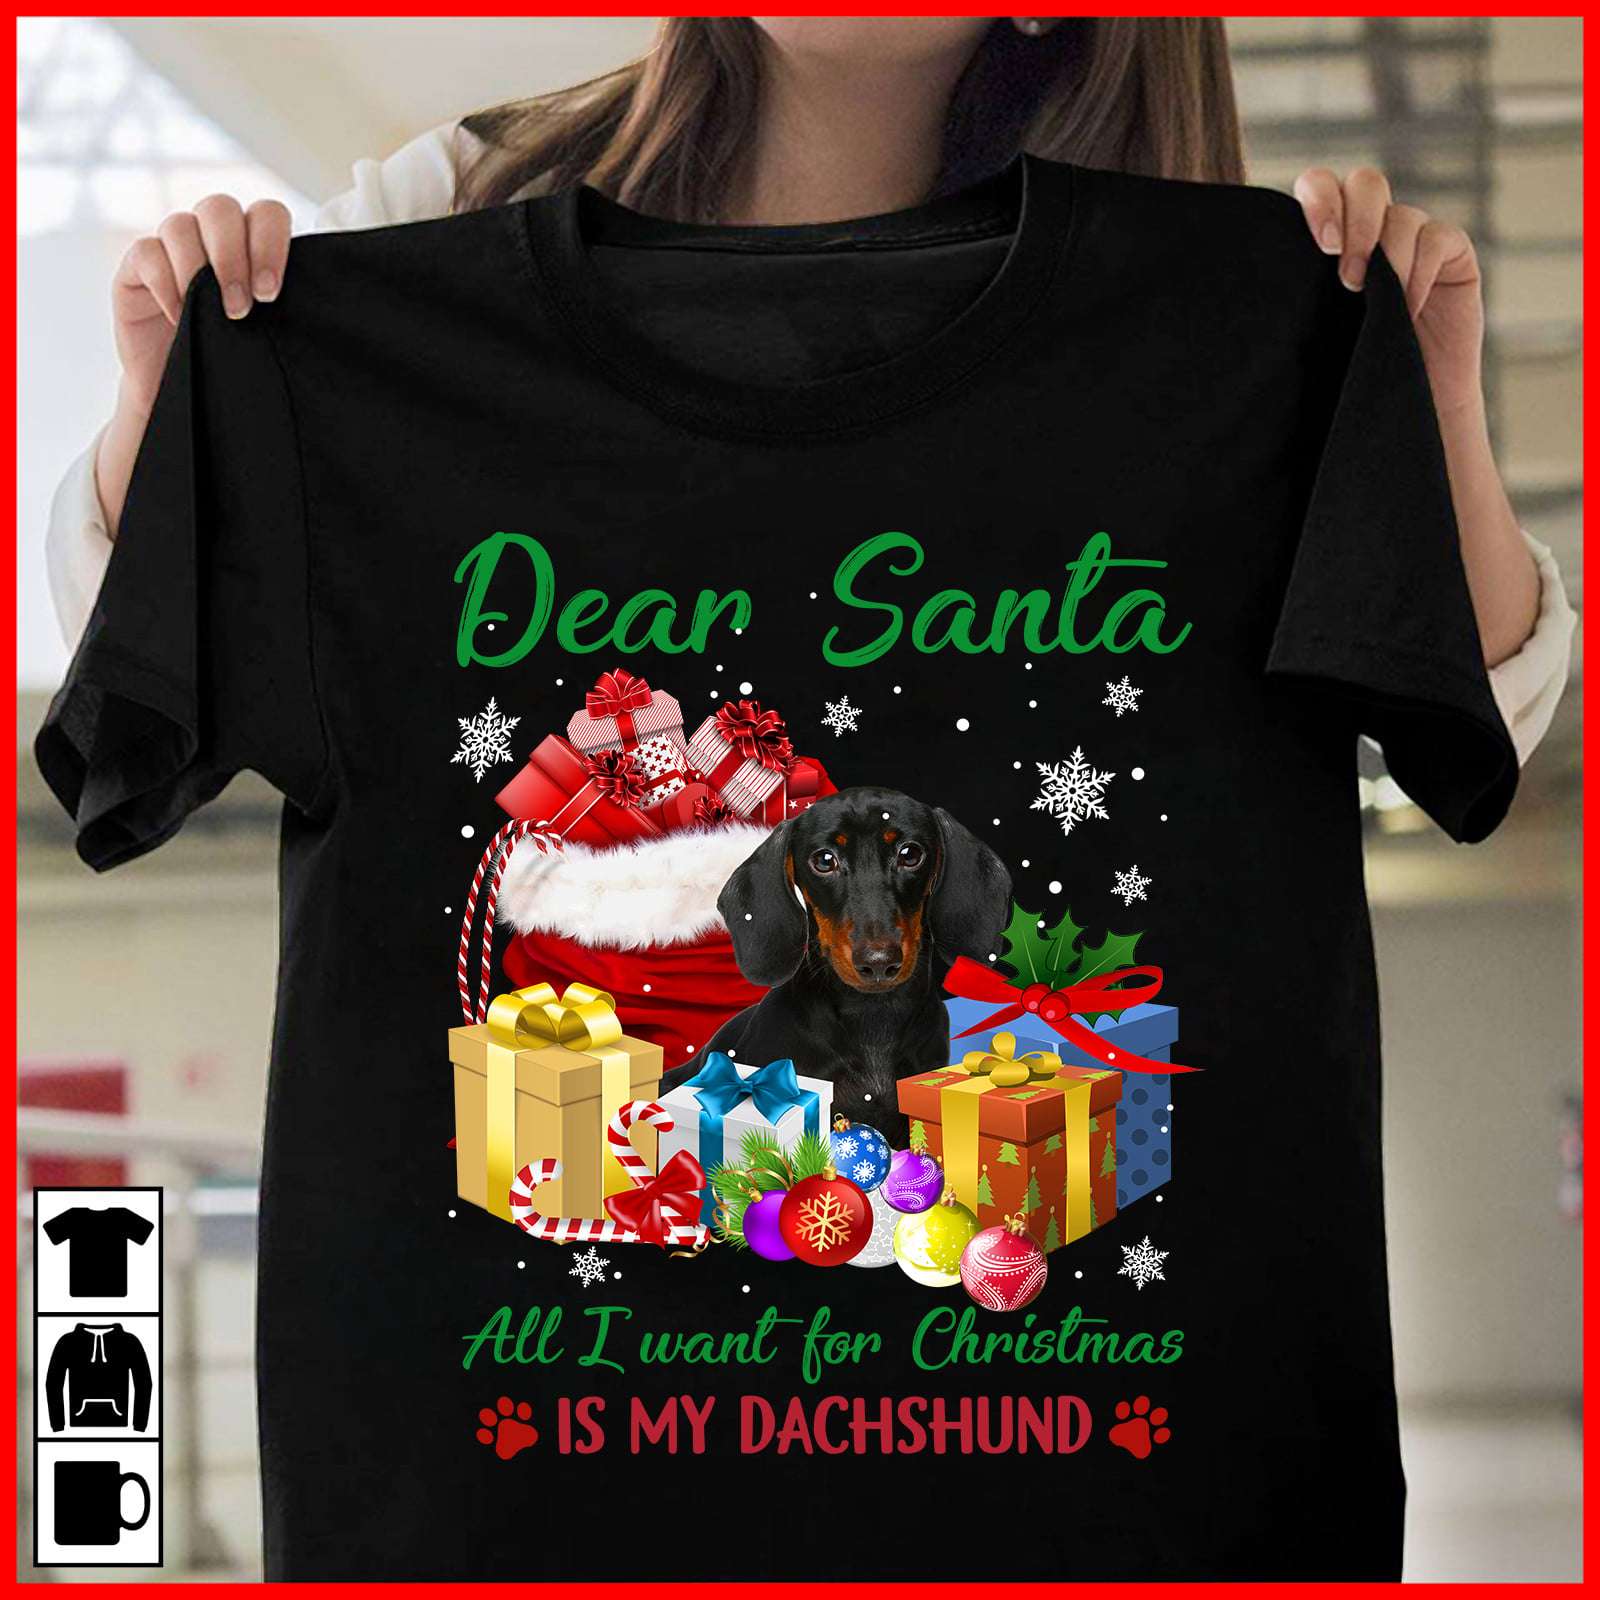 Dear Santa, All I want for Christmas is my Dachshund - Merry Christmas, Dachshund dog, Christmas day gift